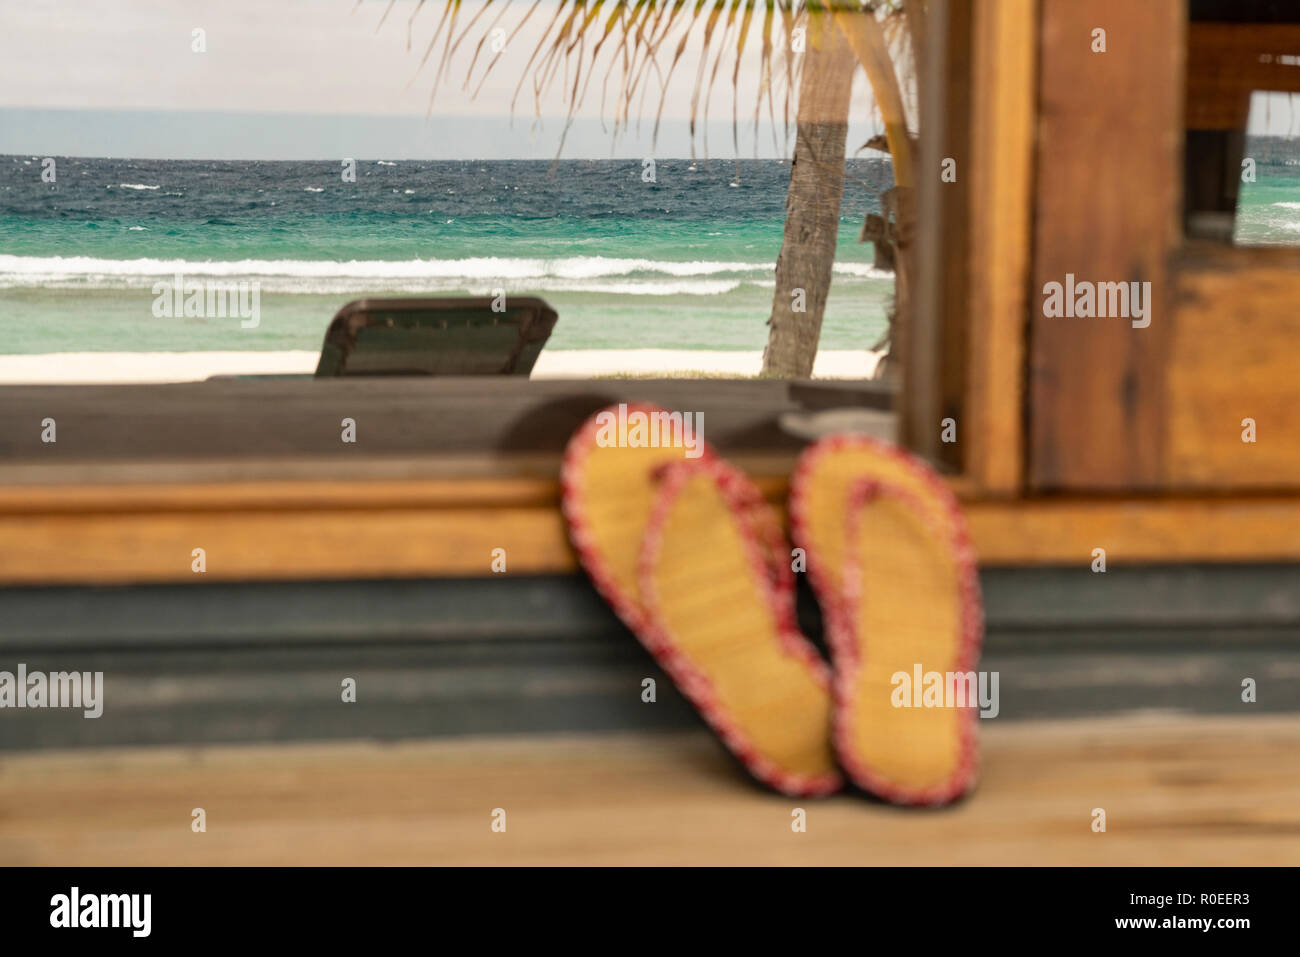 A pair of Flip Flops on a porch at the Maledives. Stock Photo